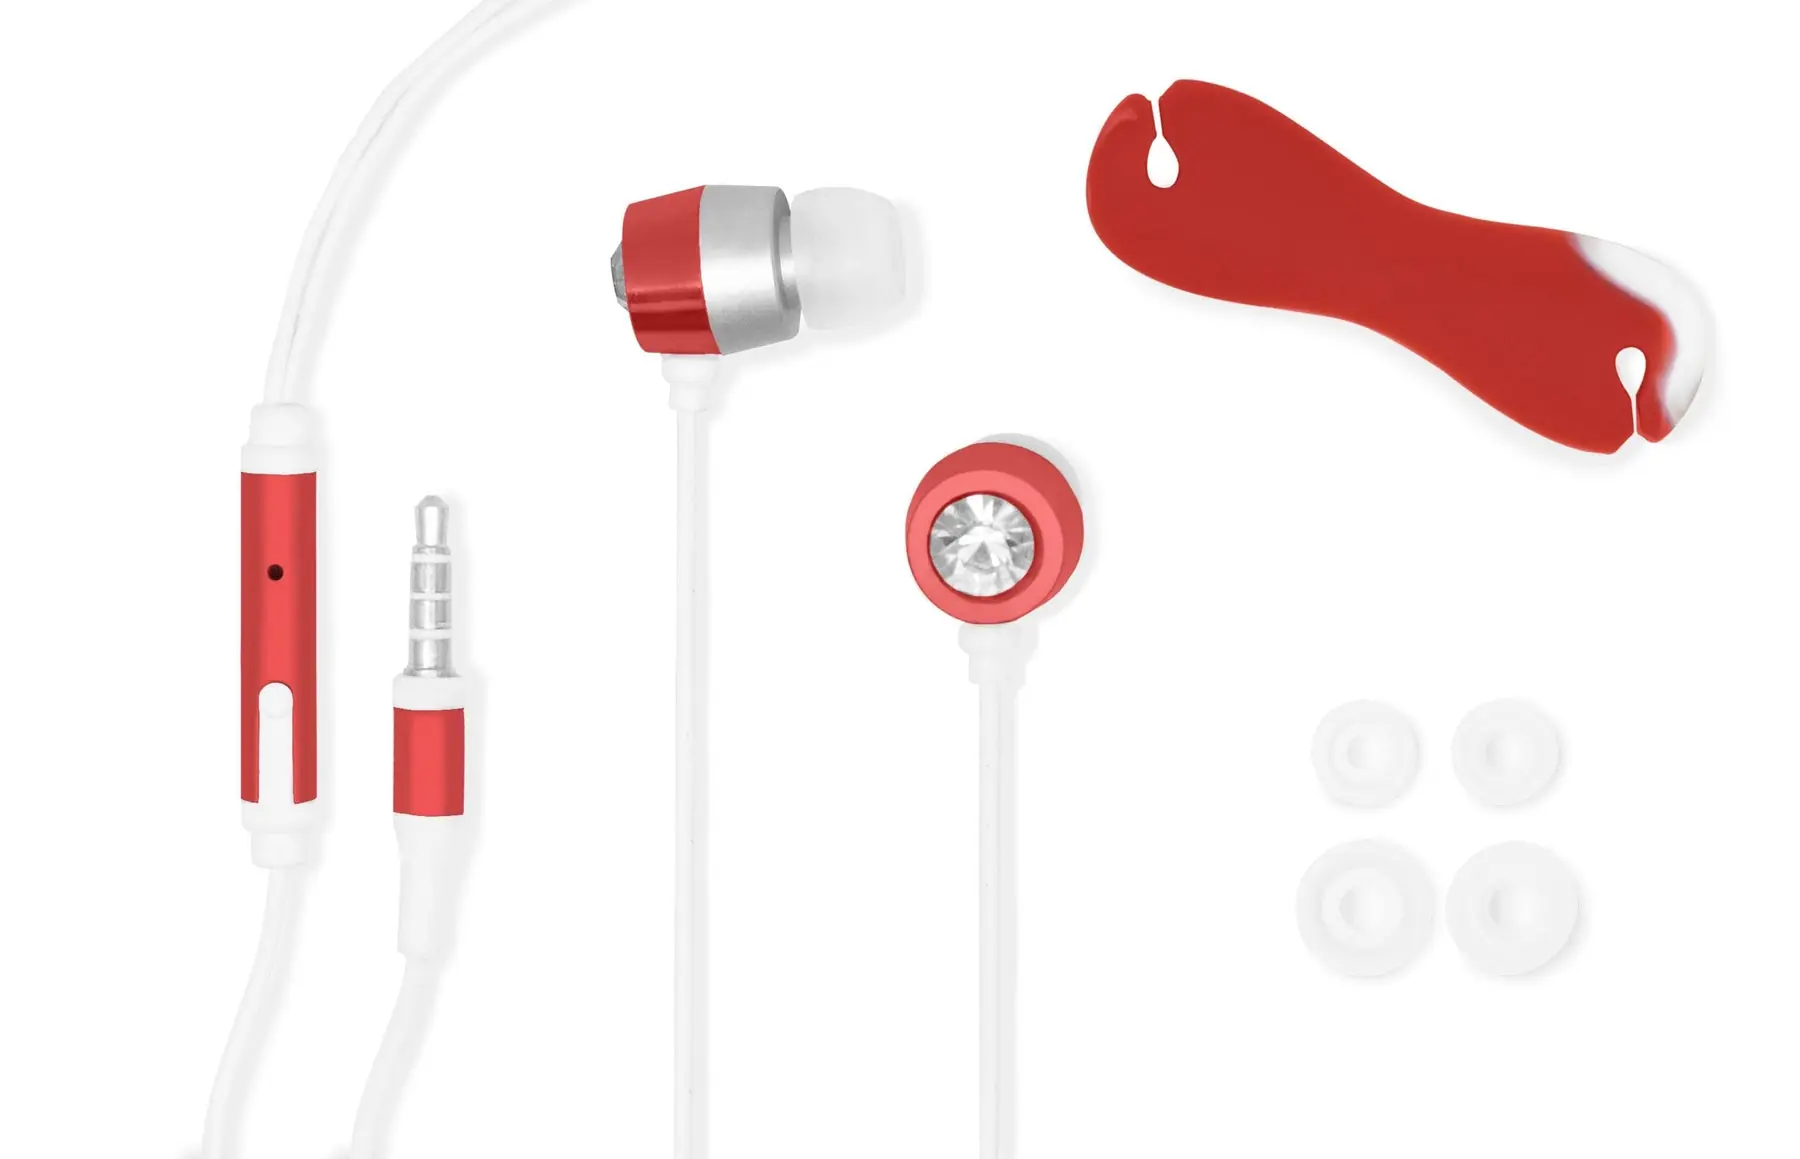 Wired Earphones with Jewel, Mic, Audio Jack, Cord Clip, and Replacement Earbuds, Red Color.